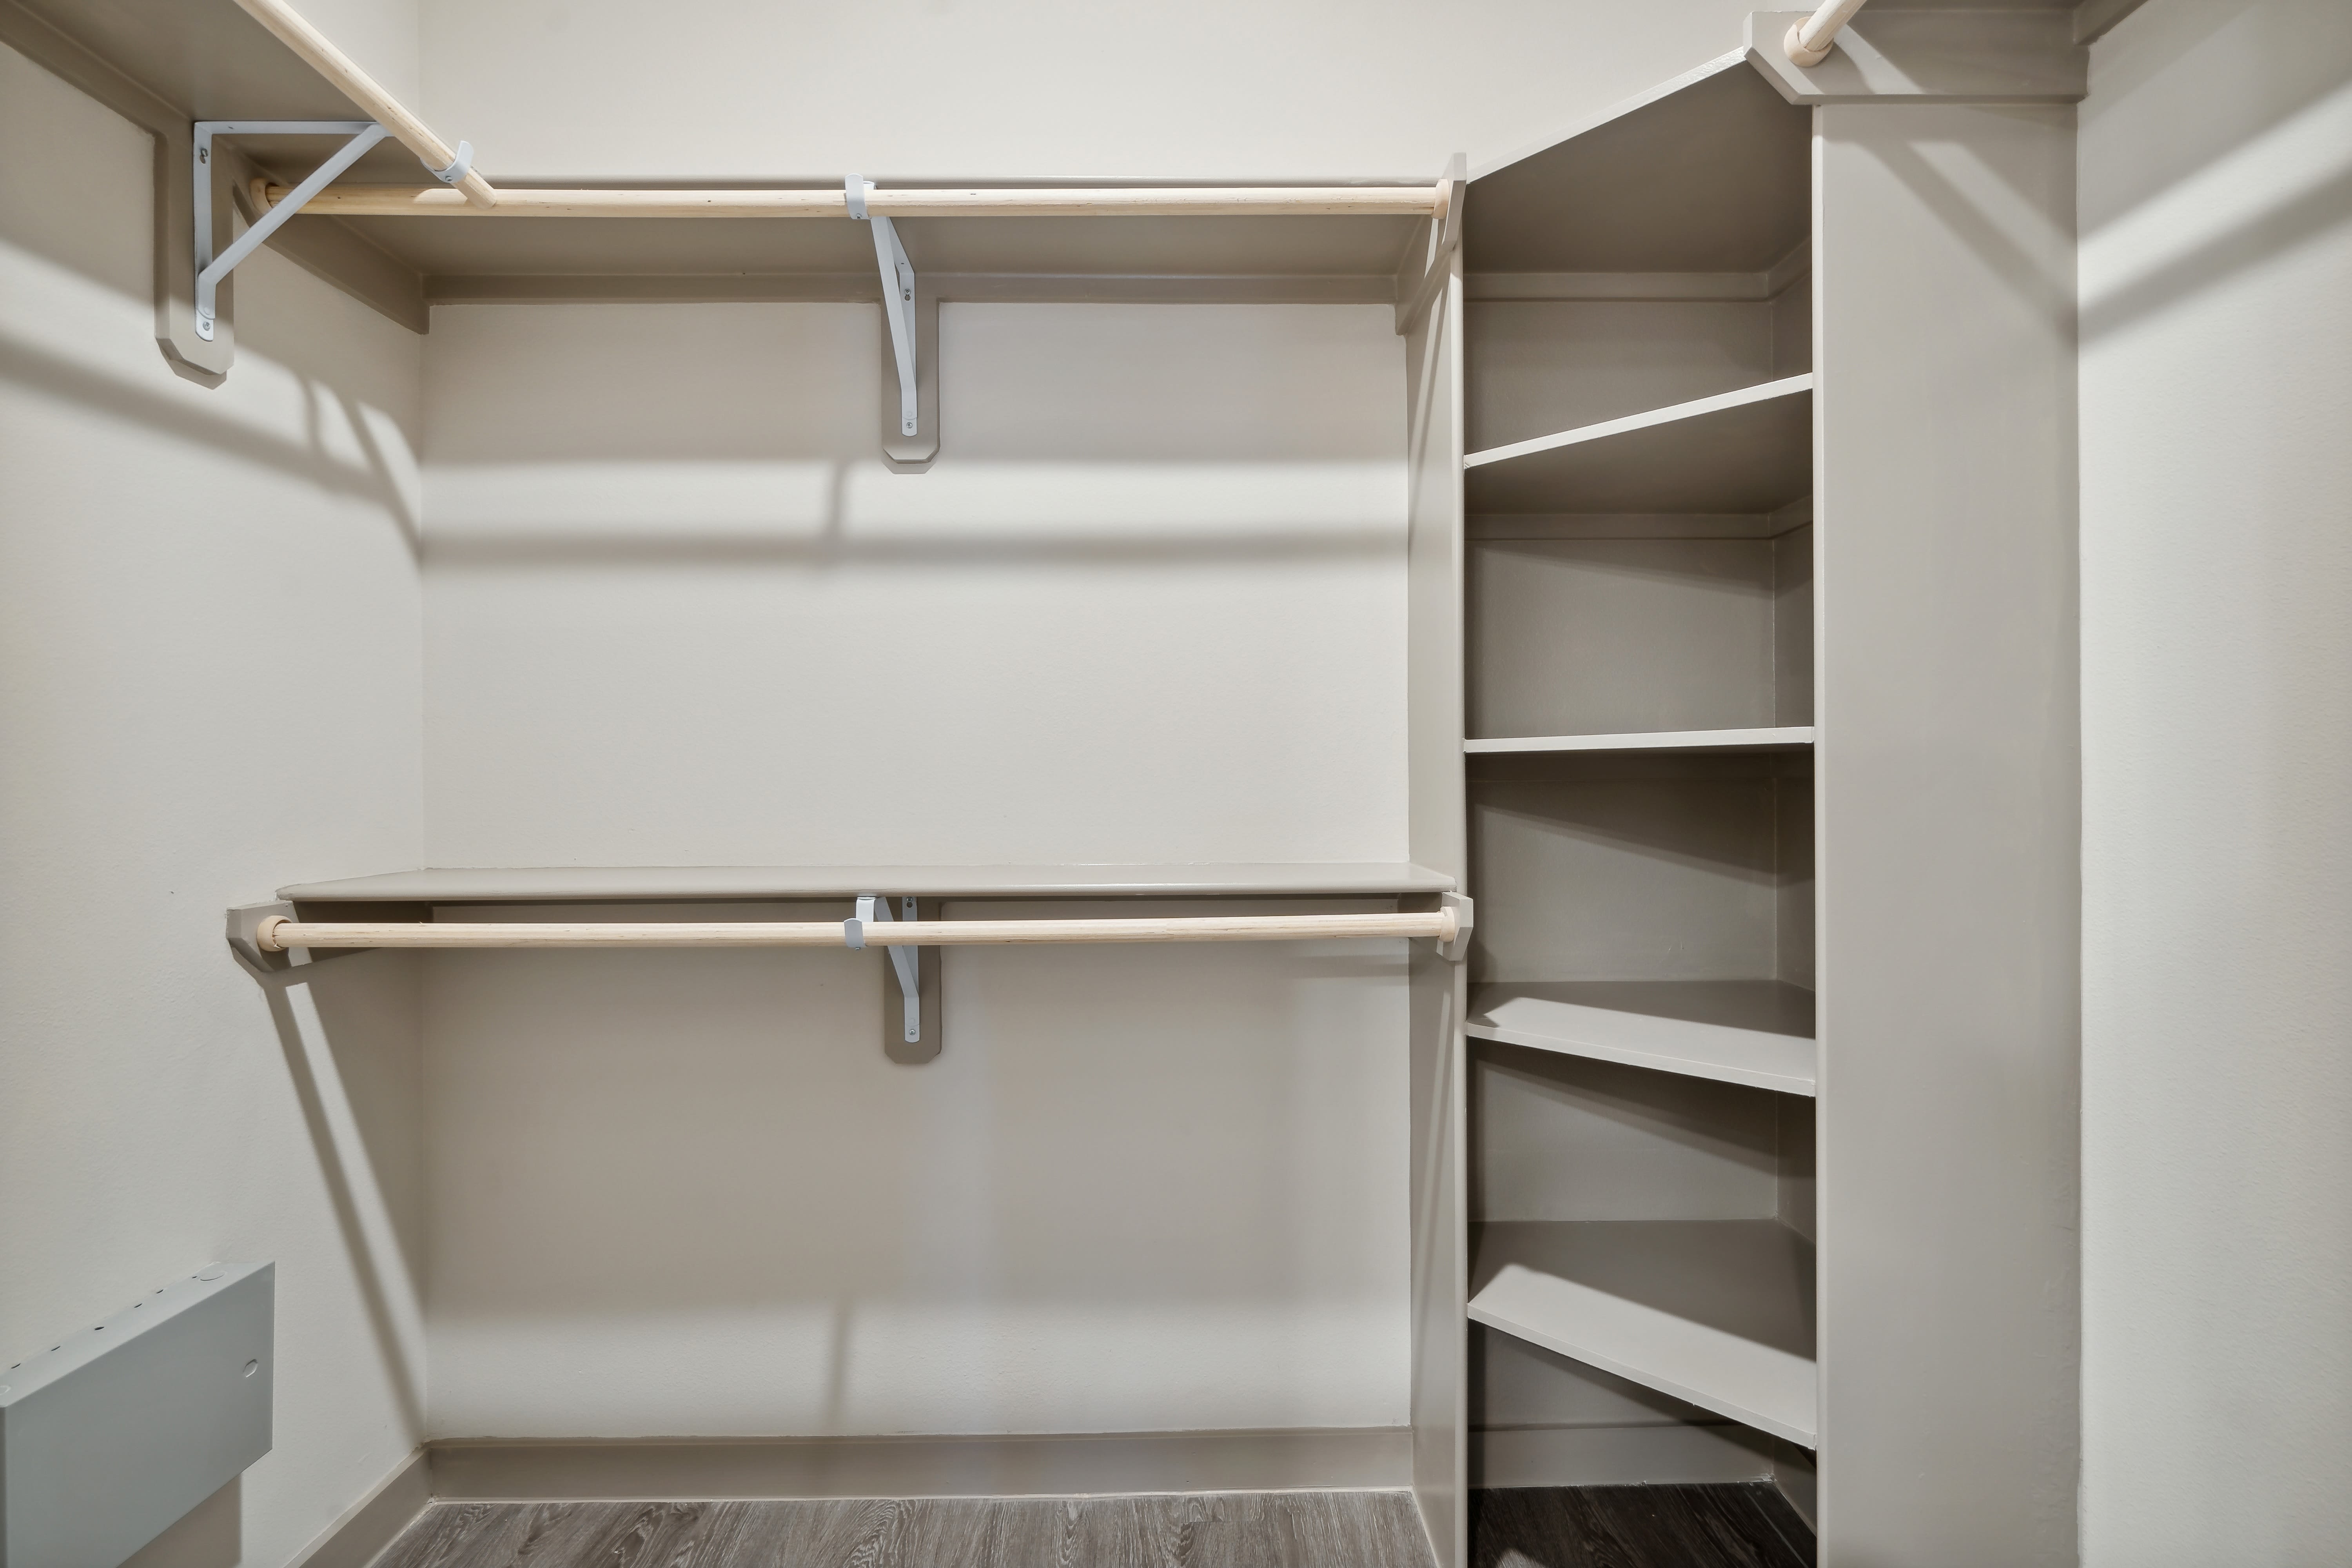 Walk-in closet with built-in shelving at Radius Wolf Ranch in Georgetown, Texas  